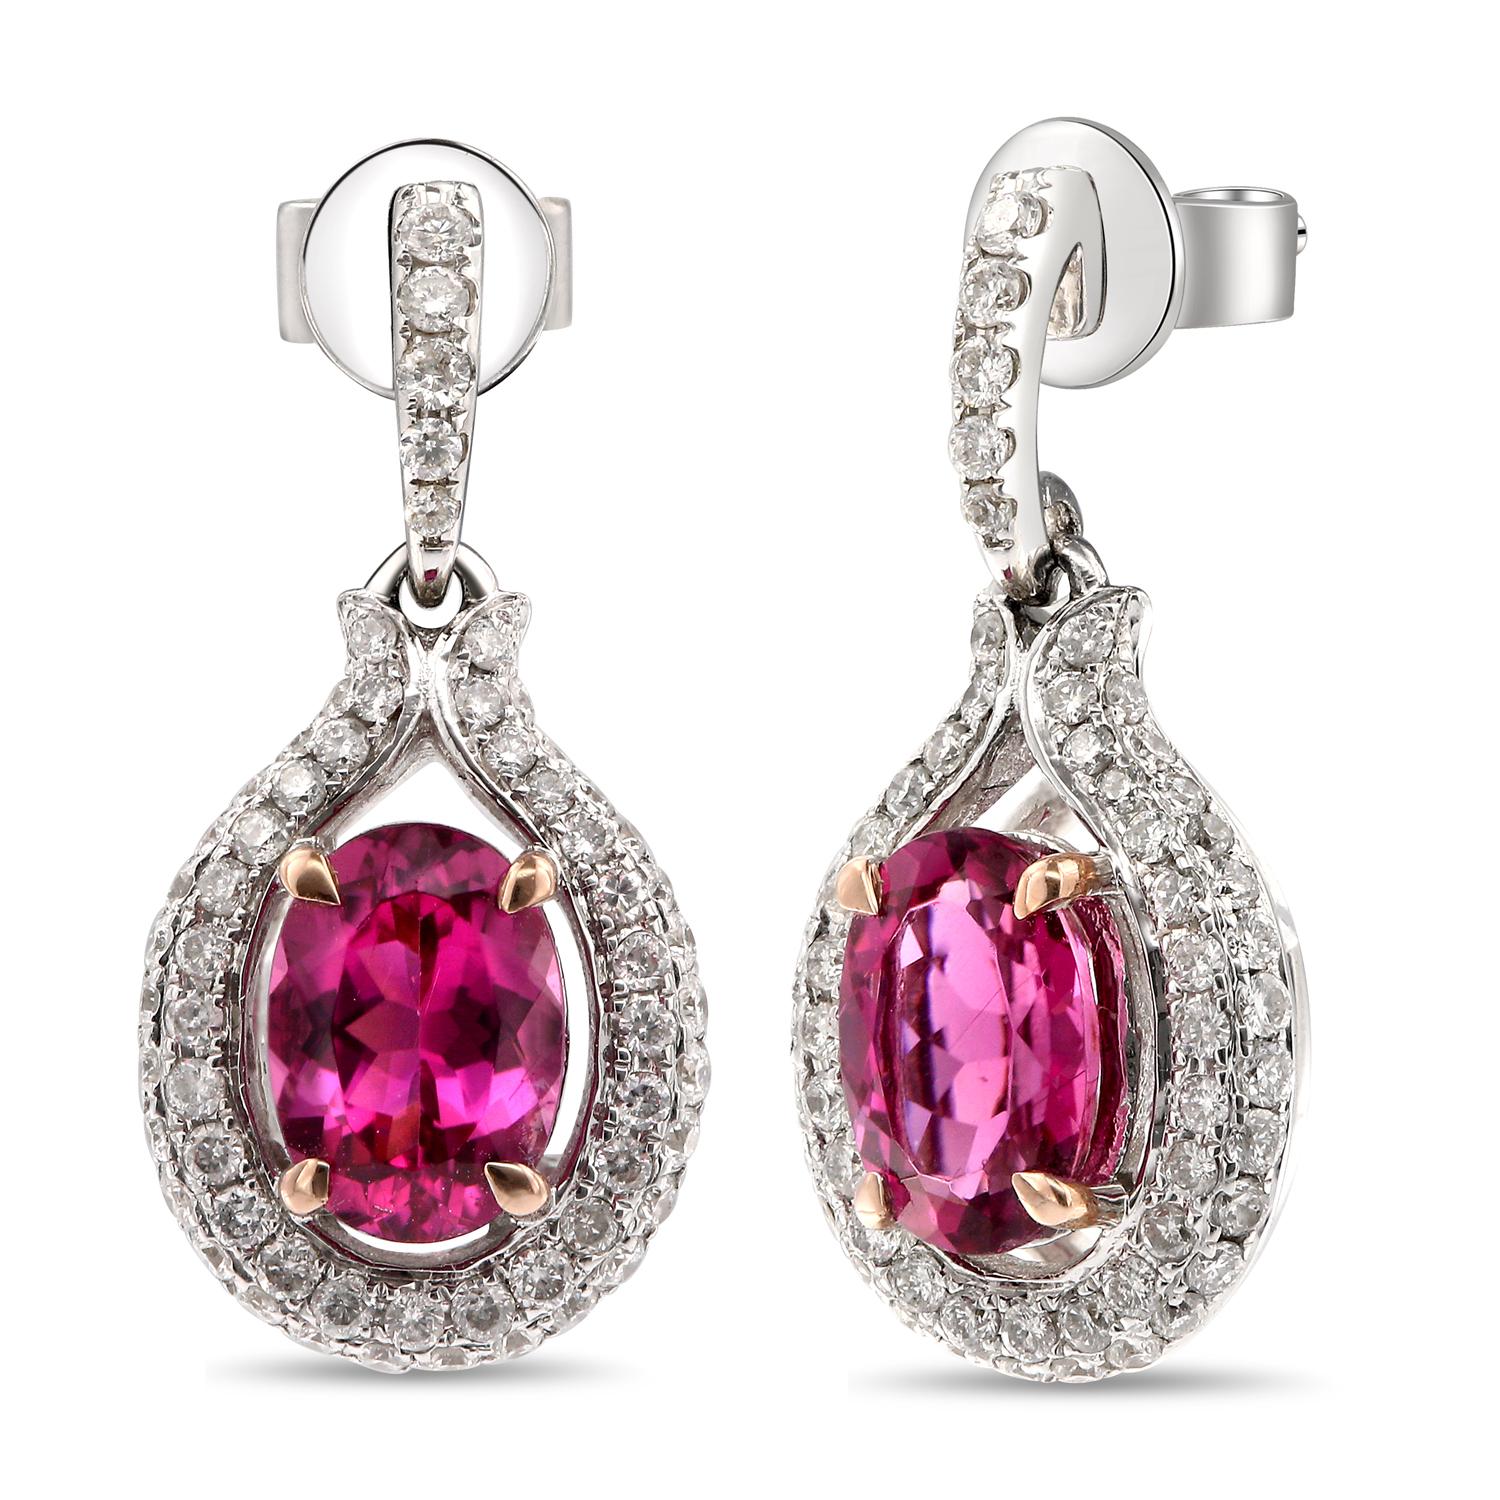 14 Karat White gold, Rubelite, and Diamond Drop Earrings.

Diamonds of approximately 0.58 carats, Ruby of approximately 1.60 carats mounted on 14 karat white gold earrings. The earrings weigh approximately 3.49 grams.

Please note: The charges